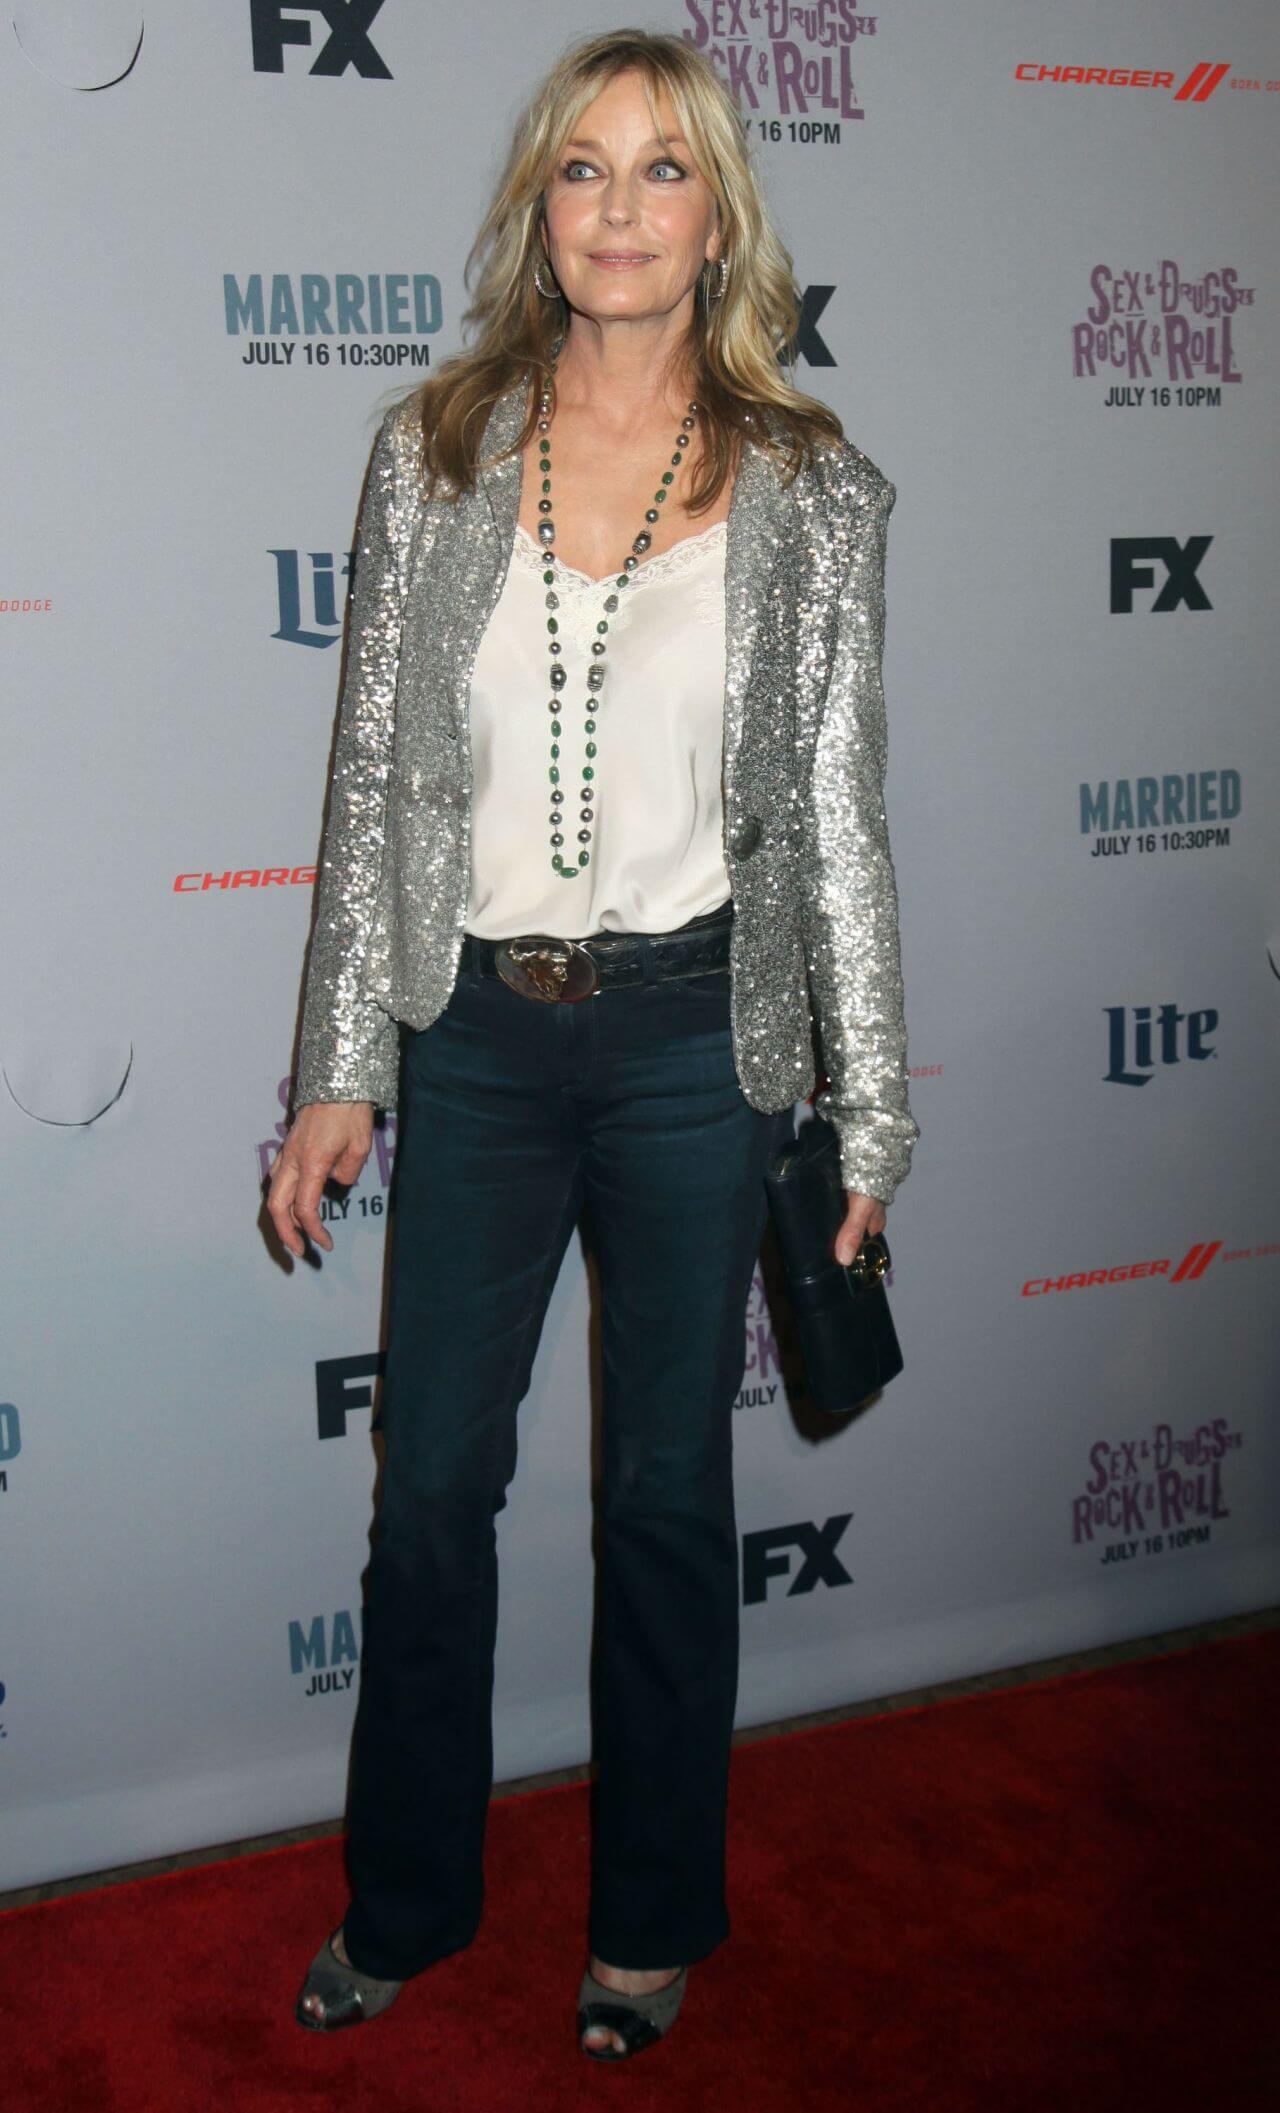 Bo Derek In a Grey Shimmery Jacket Under White Top With Denim Jeans Outfit